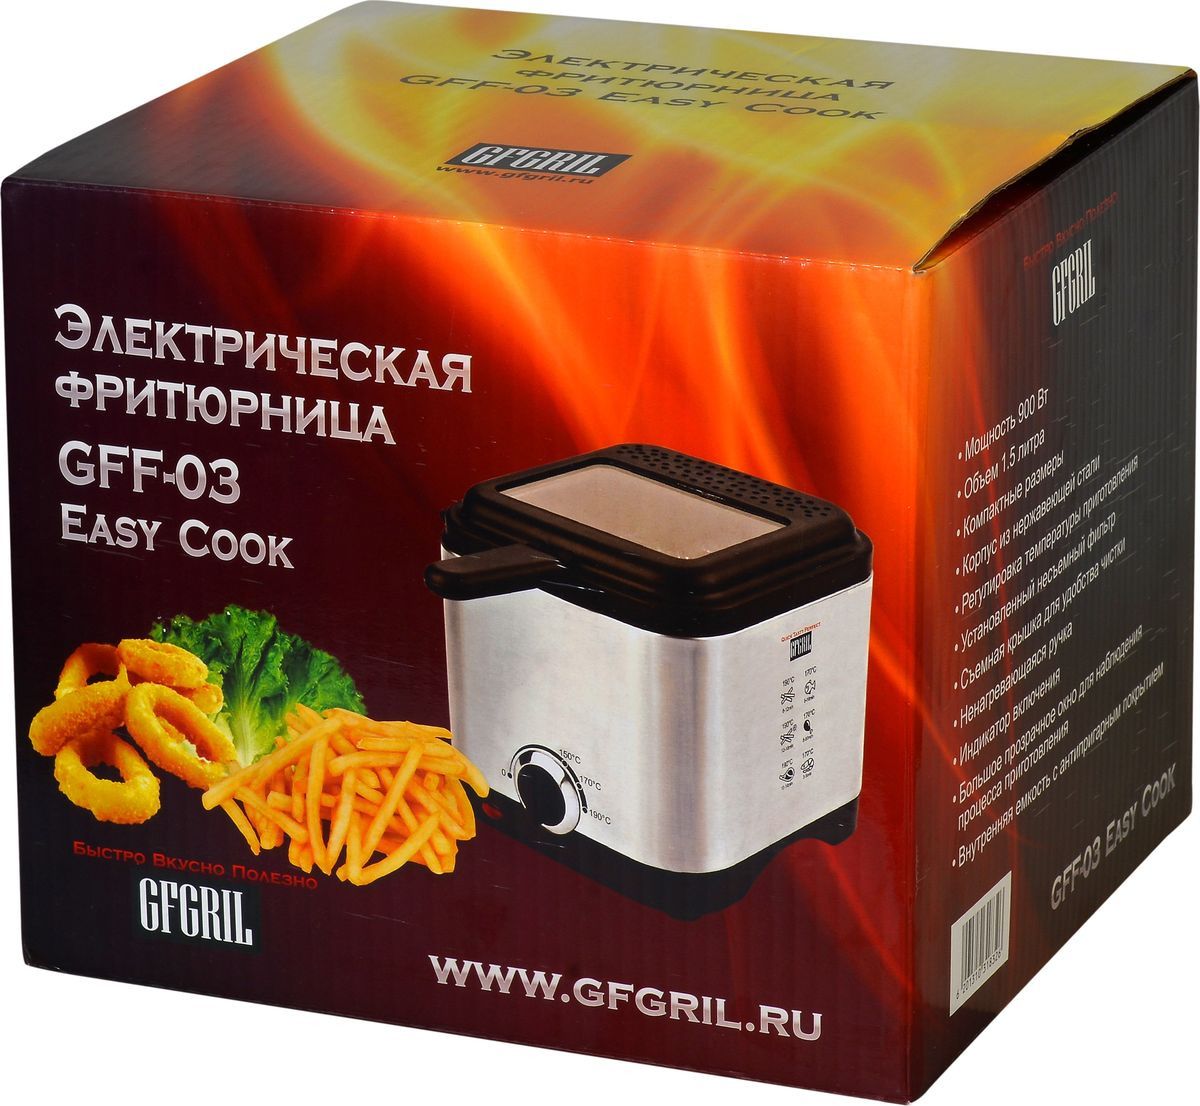  GFgril GFF-03 Easy Cook